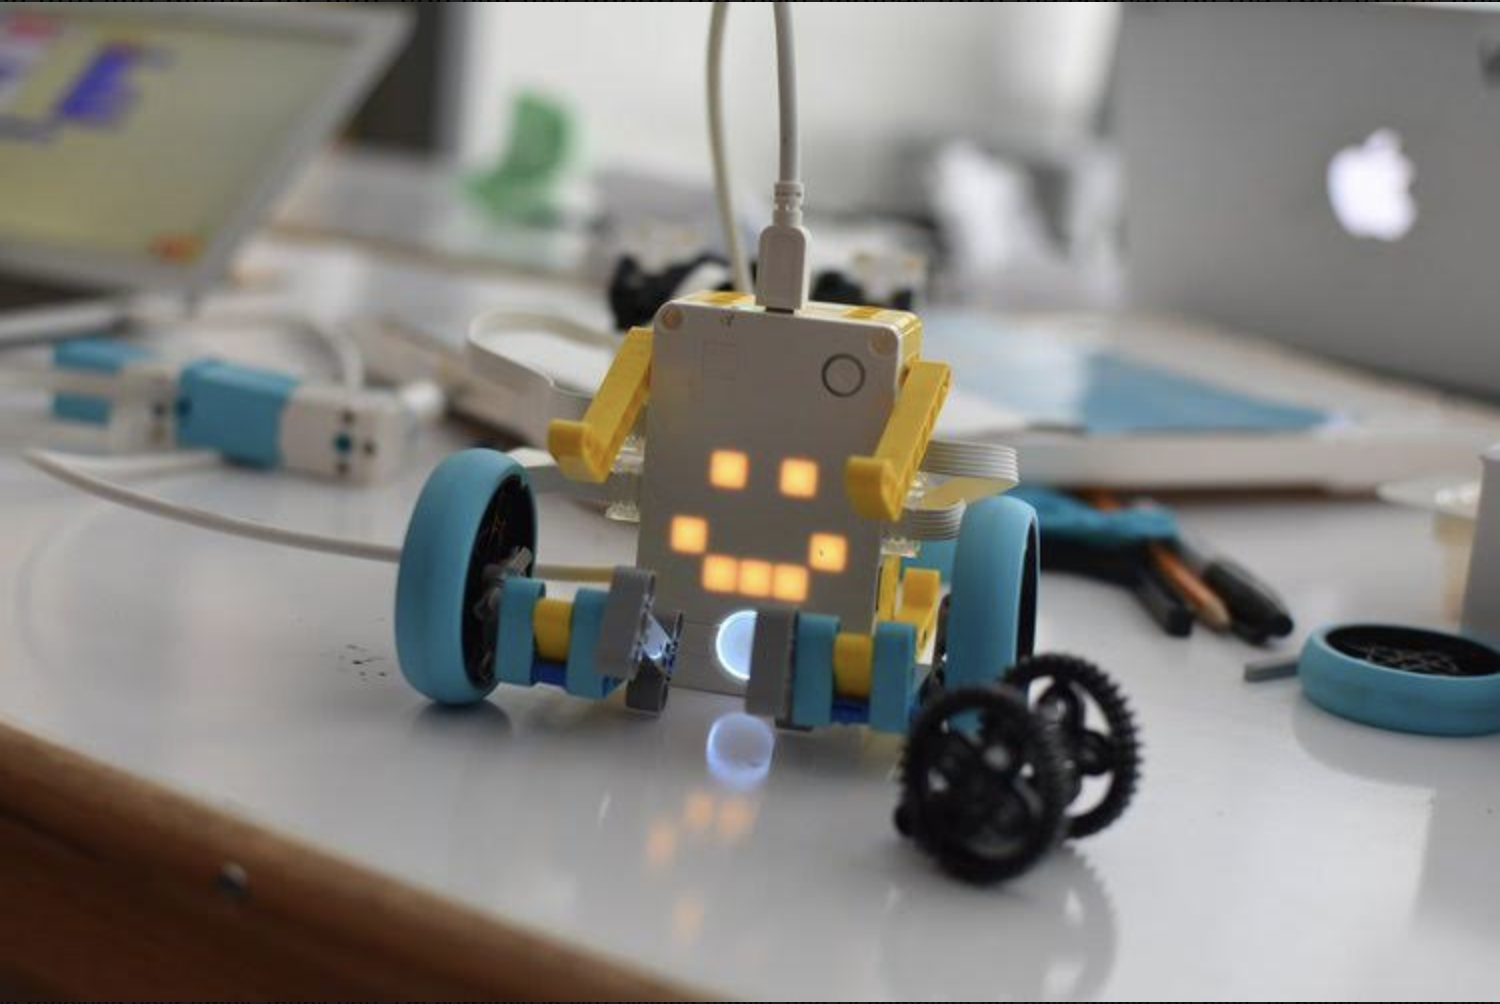 A close-up view of a small, cheerful-looking robot with glowing eyes on a desk scattered with various robotics parts and tools. In the background, there's a blurred view of a laptop with the Apple logo, indicative of the technology-rich learning environment at Court Street Arts.